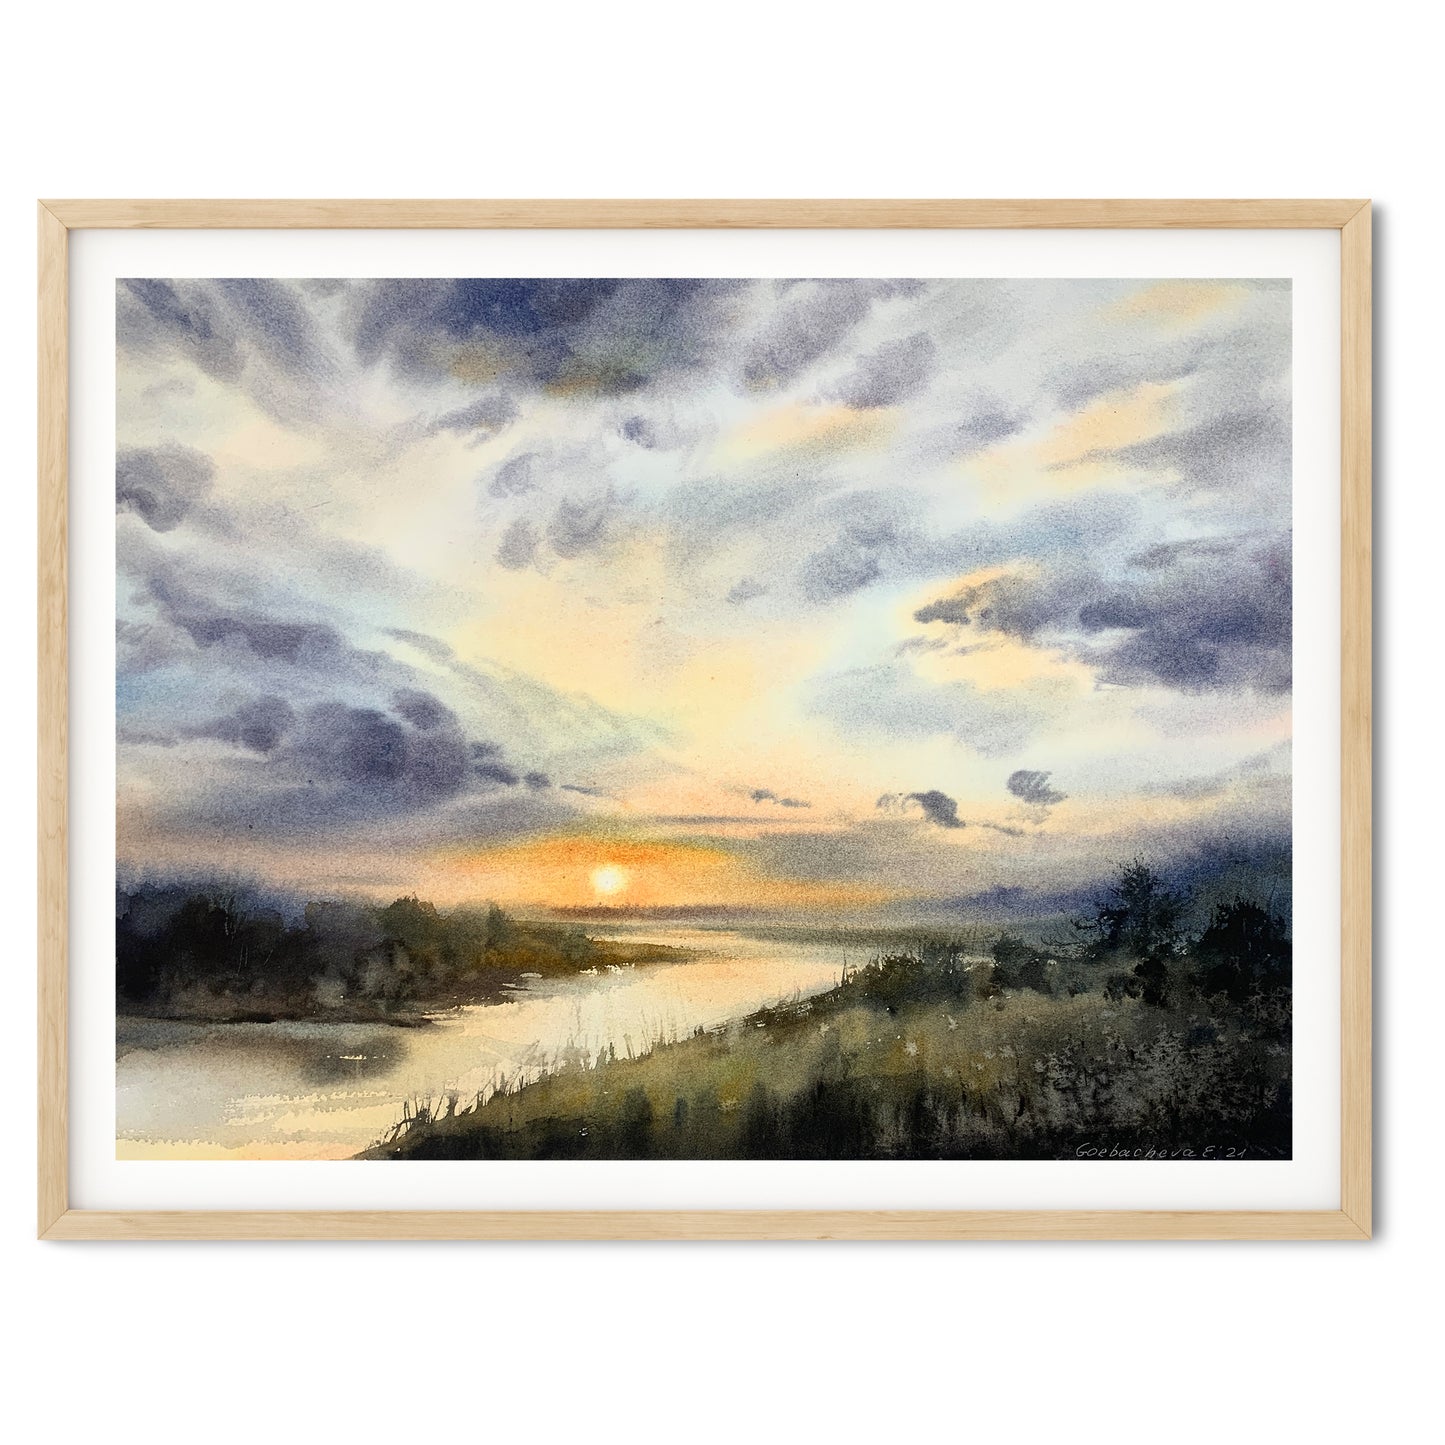 Rural Landscape Painting, Country Field Watercolor Original, Nature Art, Sunset River Wall Decor, Cloud Sky, Gift